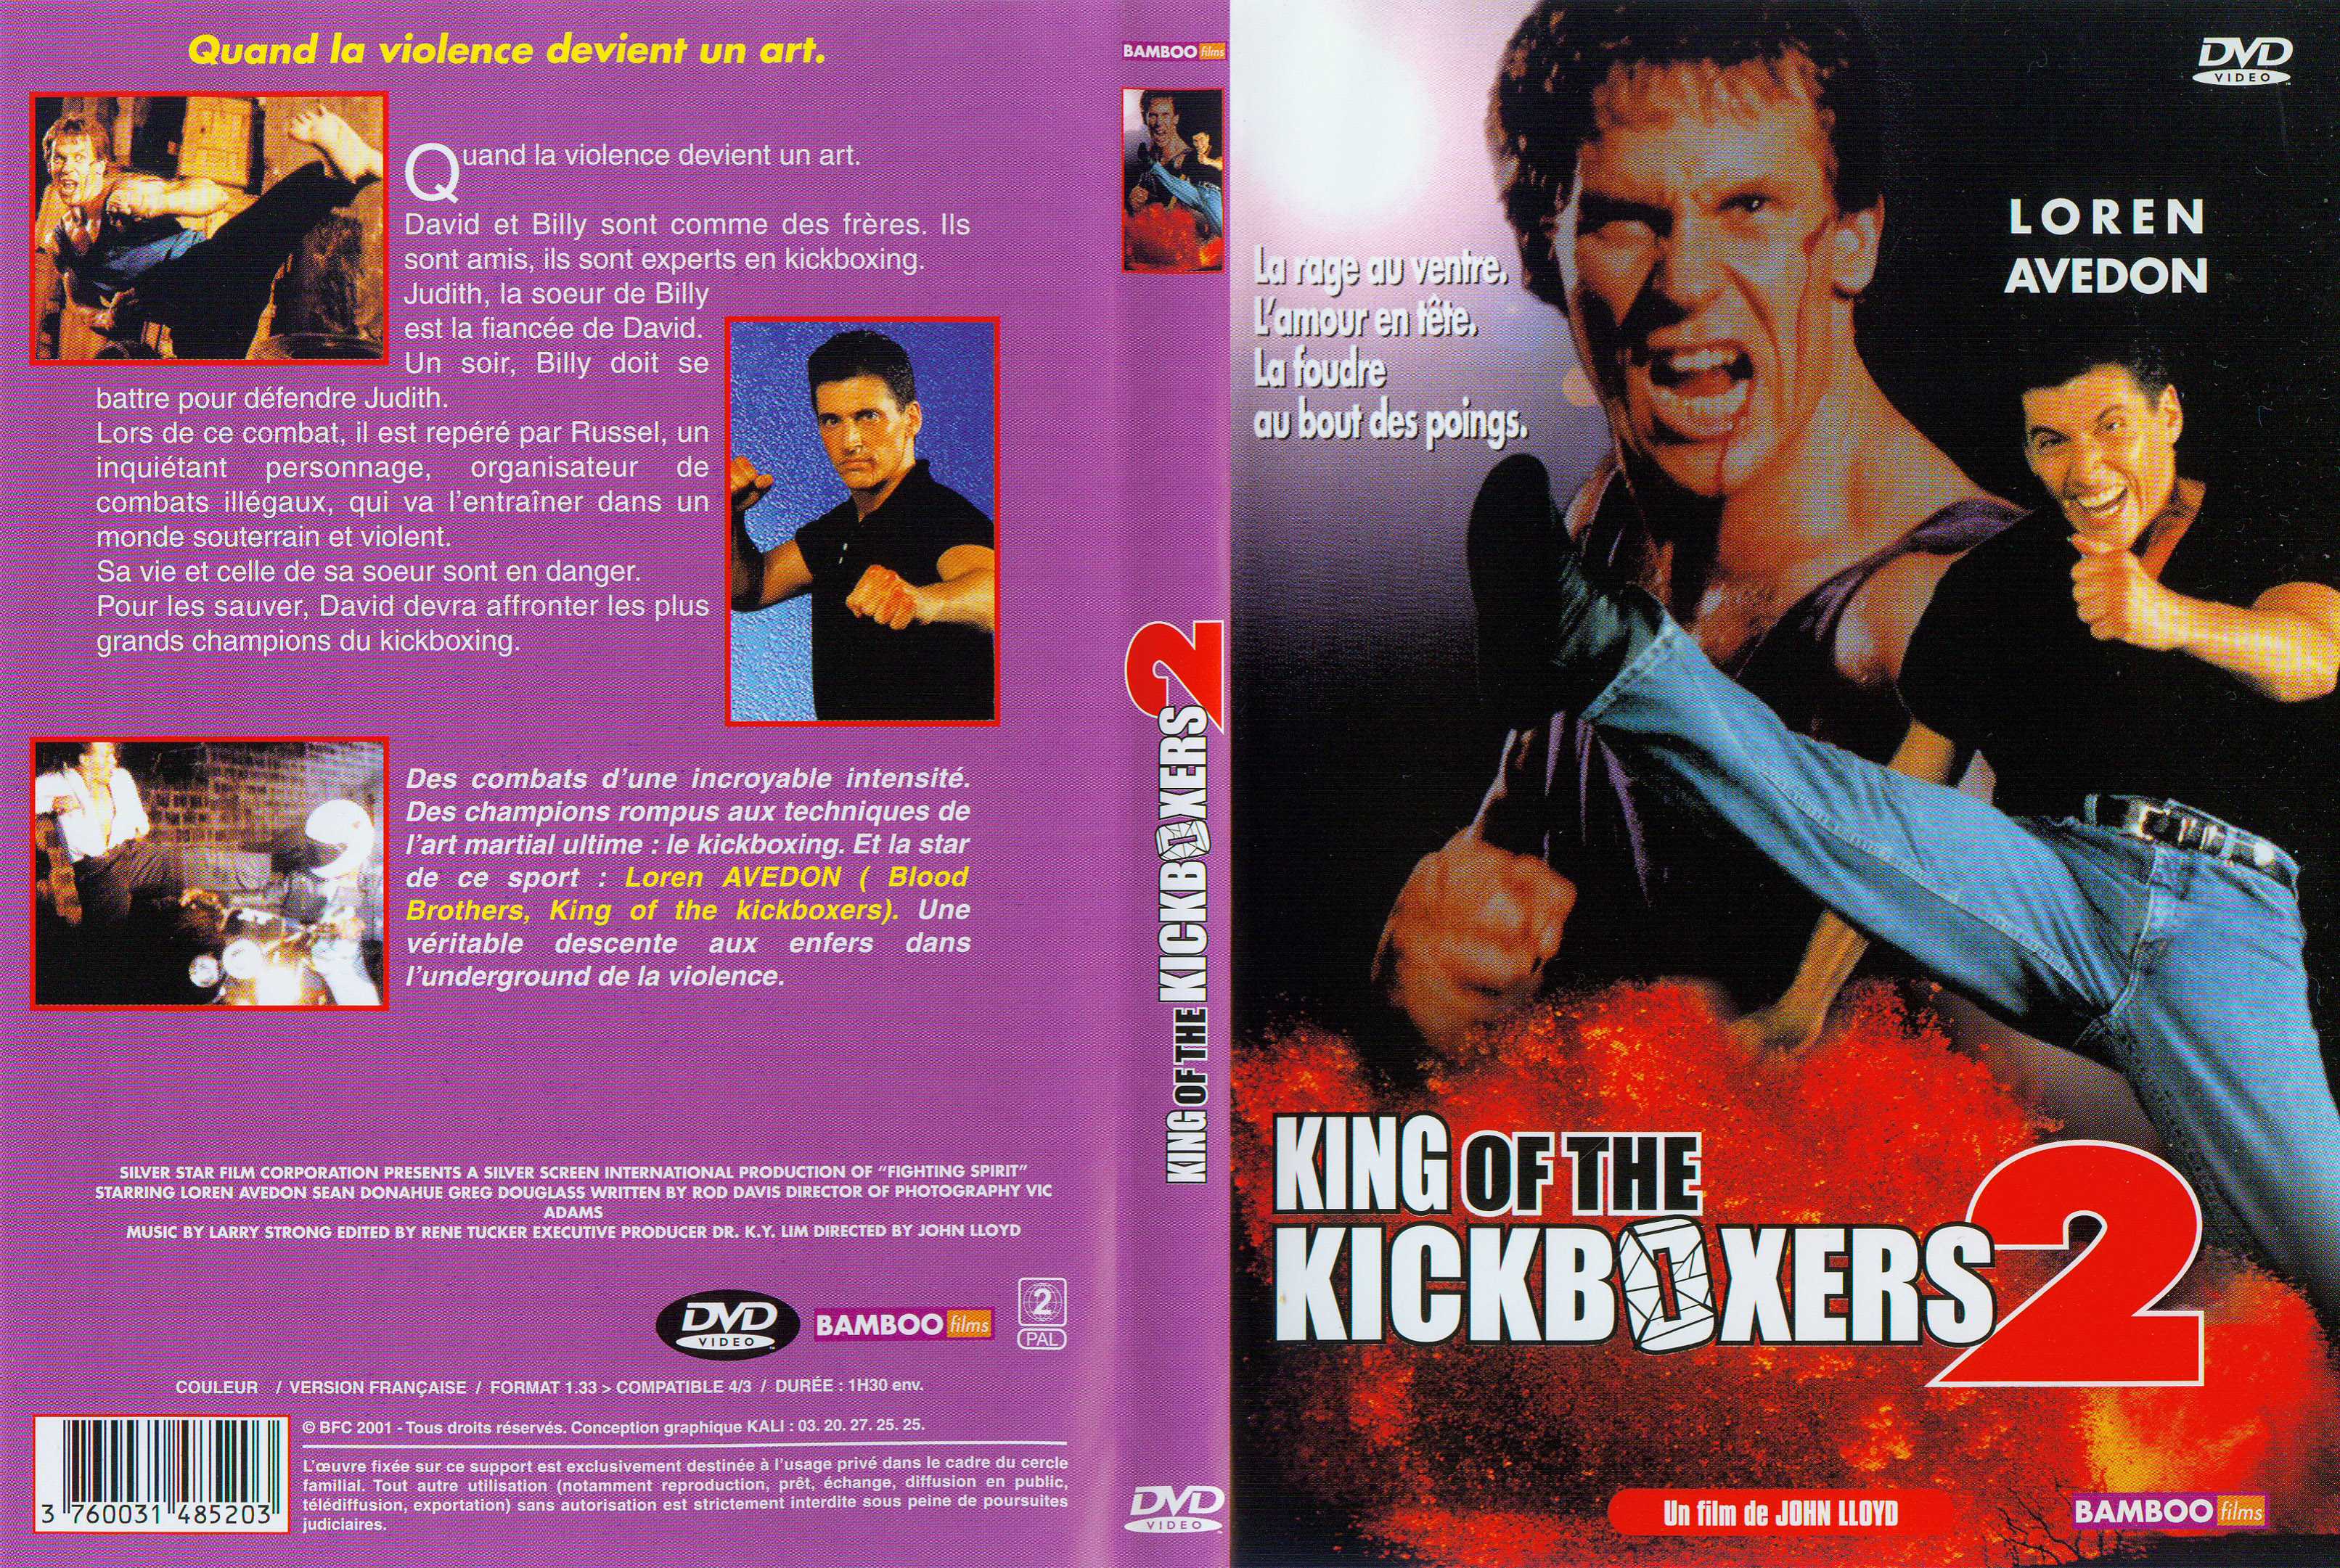 Jaquette DVD King of the kickboxers 2